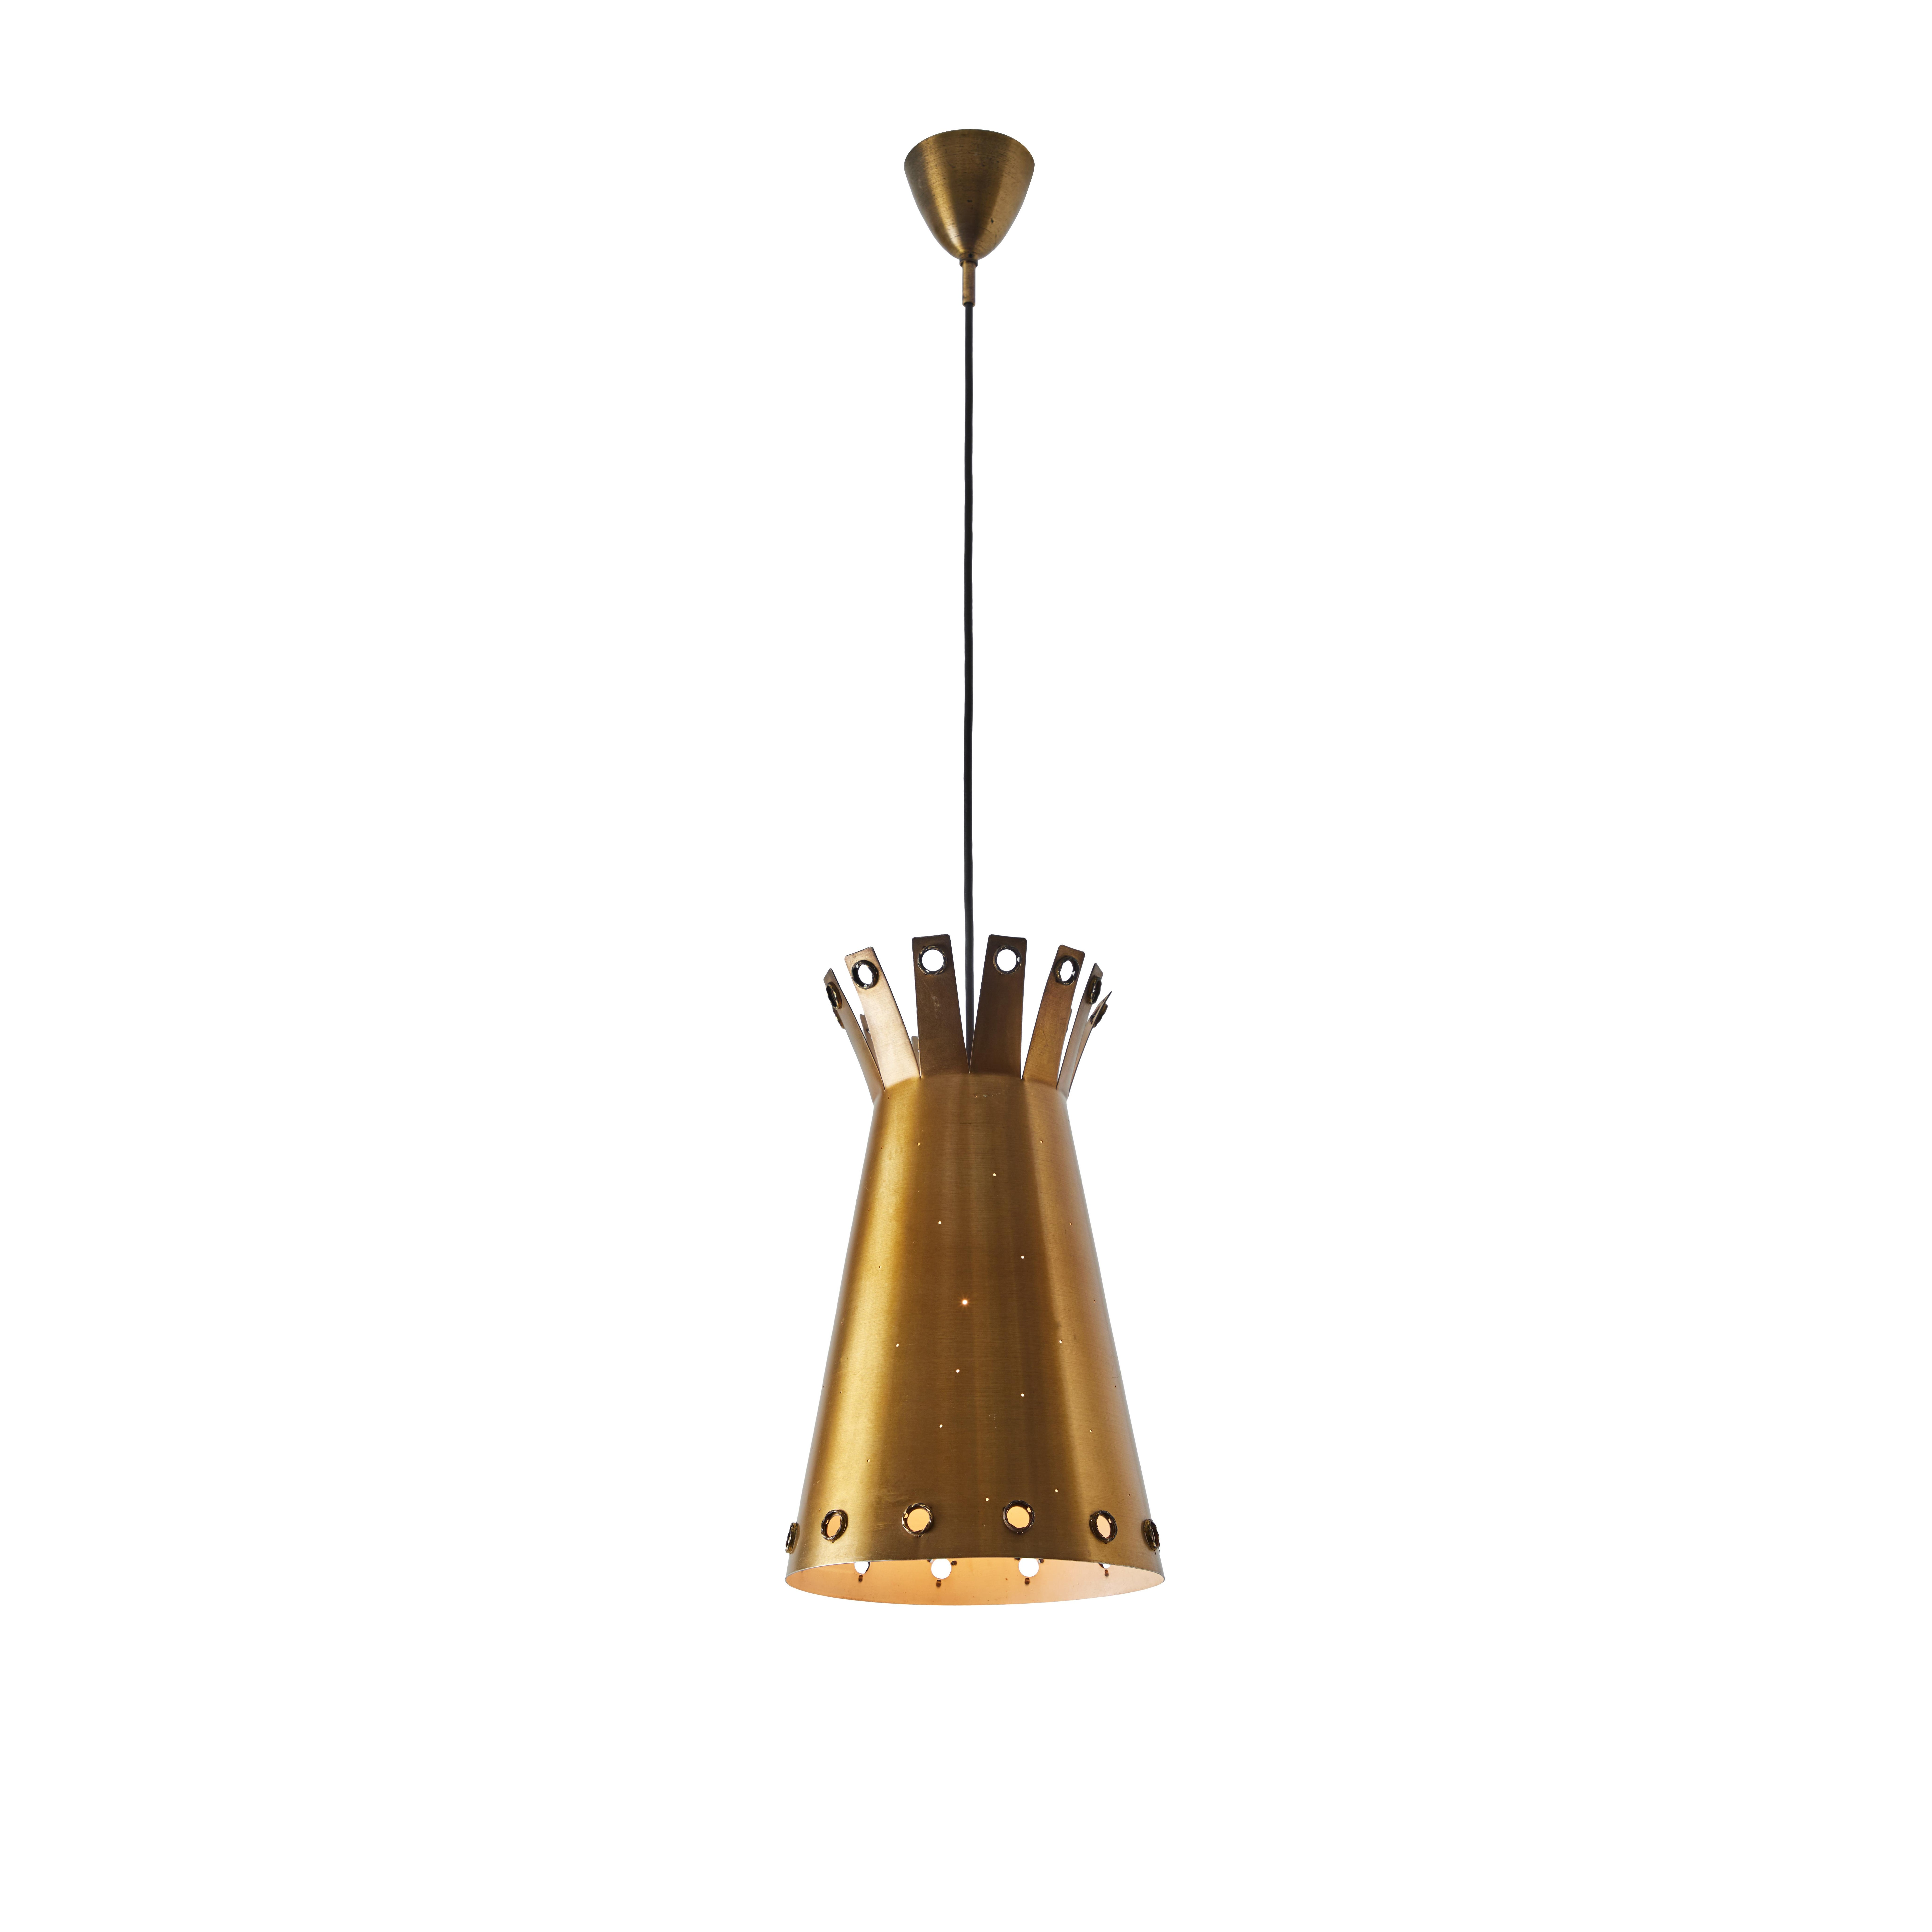 Large 1950s Italian perforated brass double-cone pendant attributed to Stilnovo. A highly functional and refined suspension light of attractive scale and incomparable refinement, executed in richly patinated perforated and tab cut brass. Unmarked.